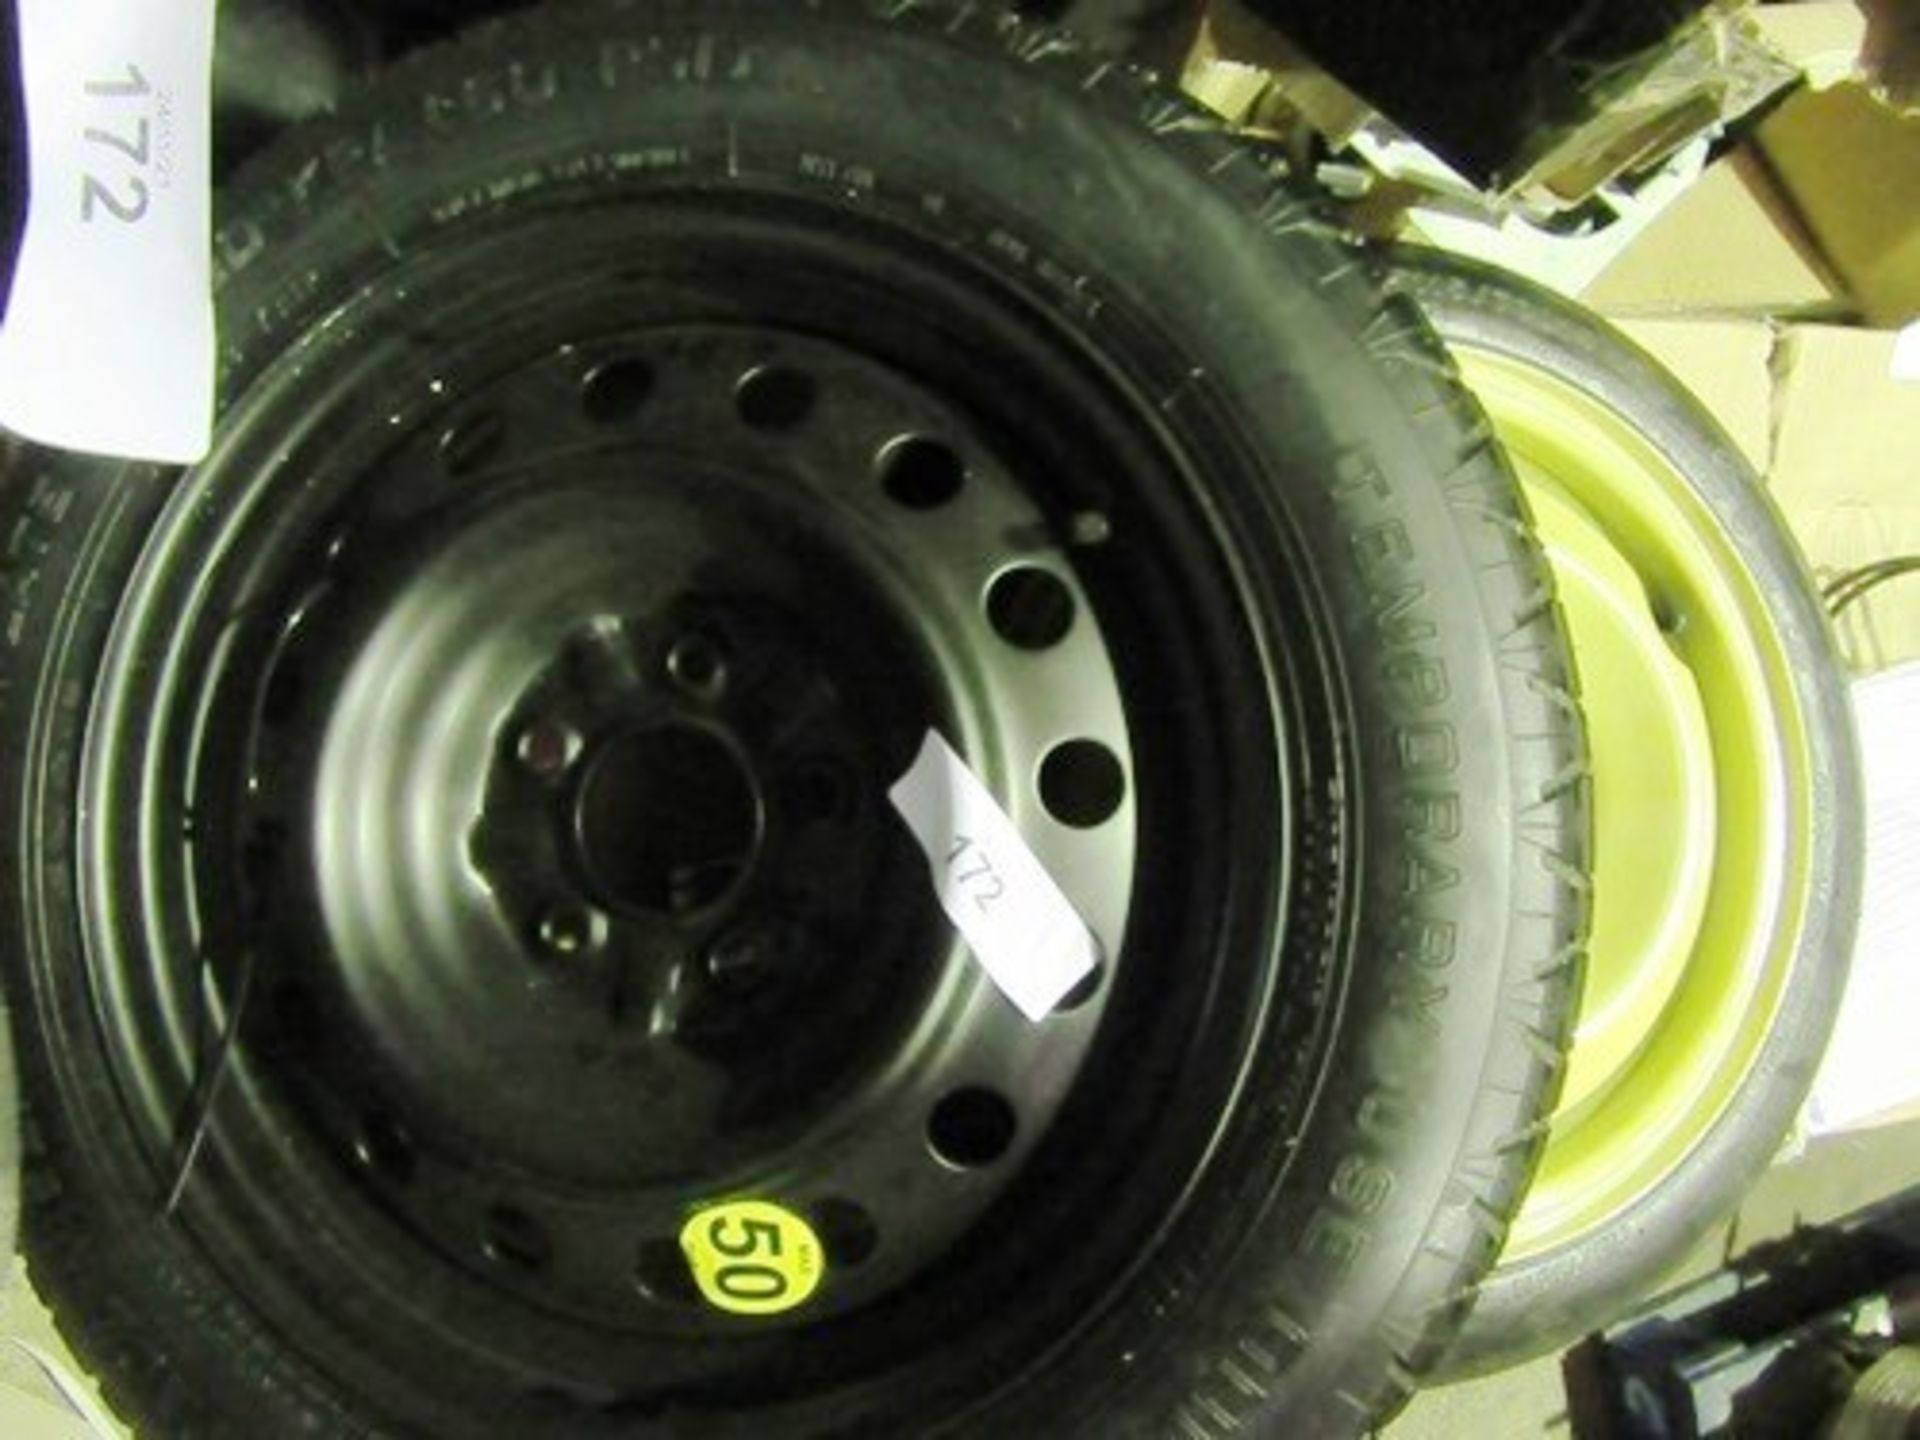 2 x Get You Home space saver tyres, new and 1 x Get You Home space saver tyre, second-hand (